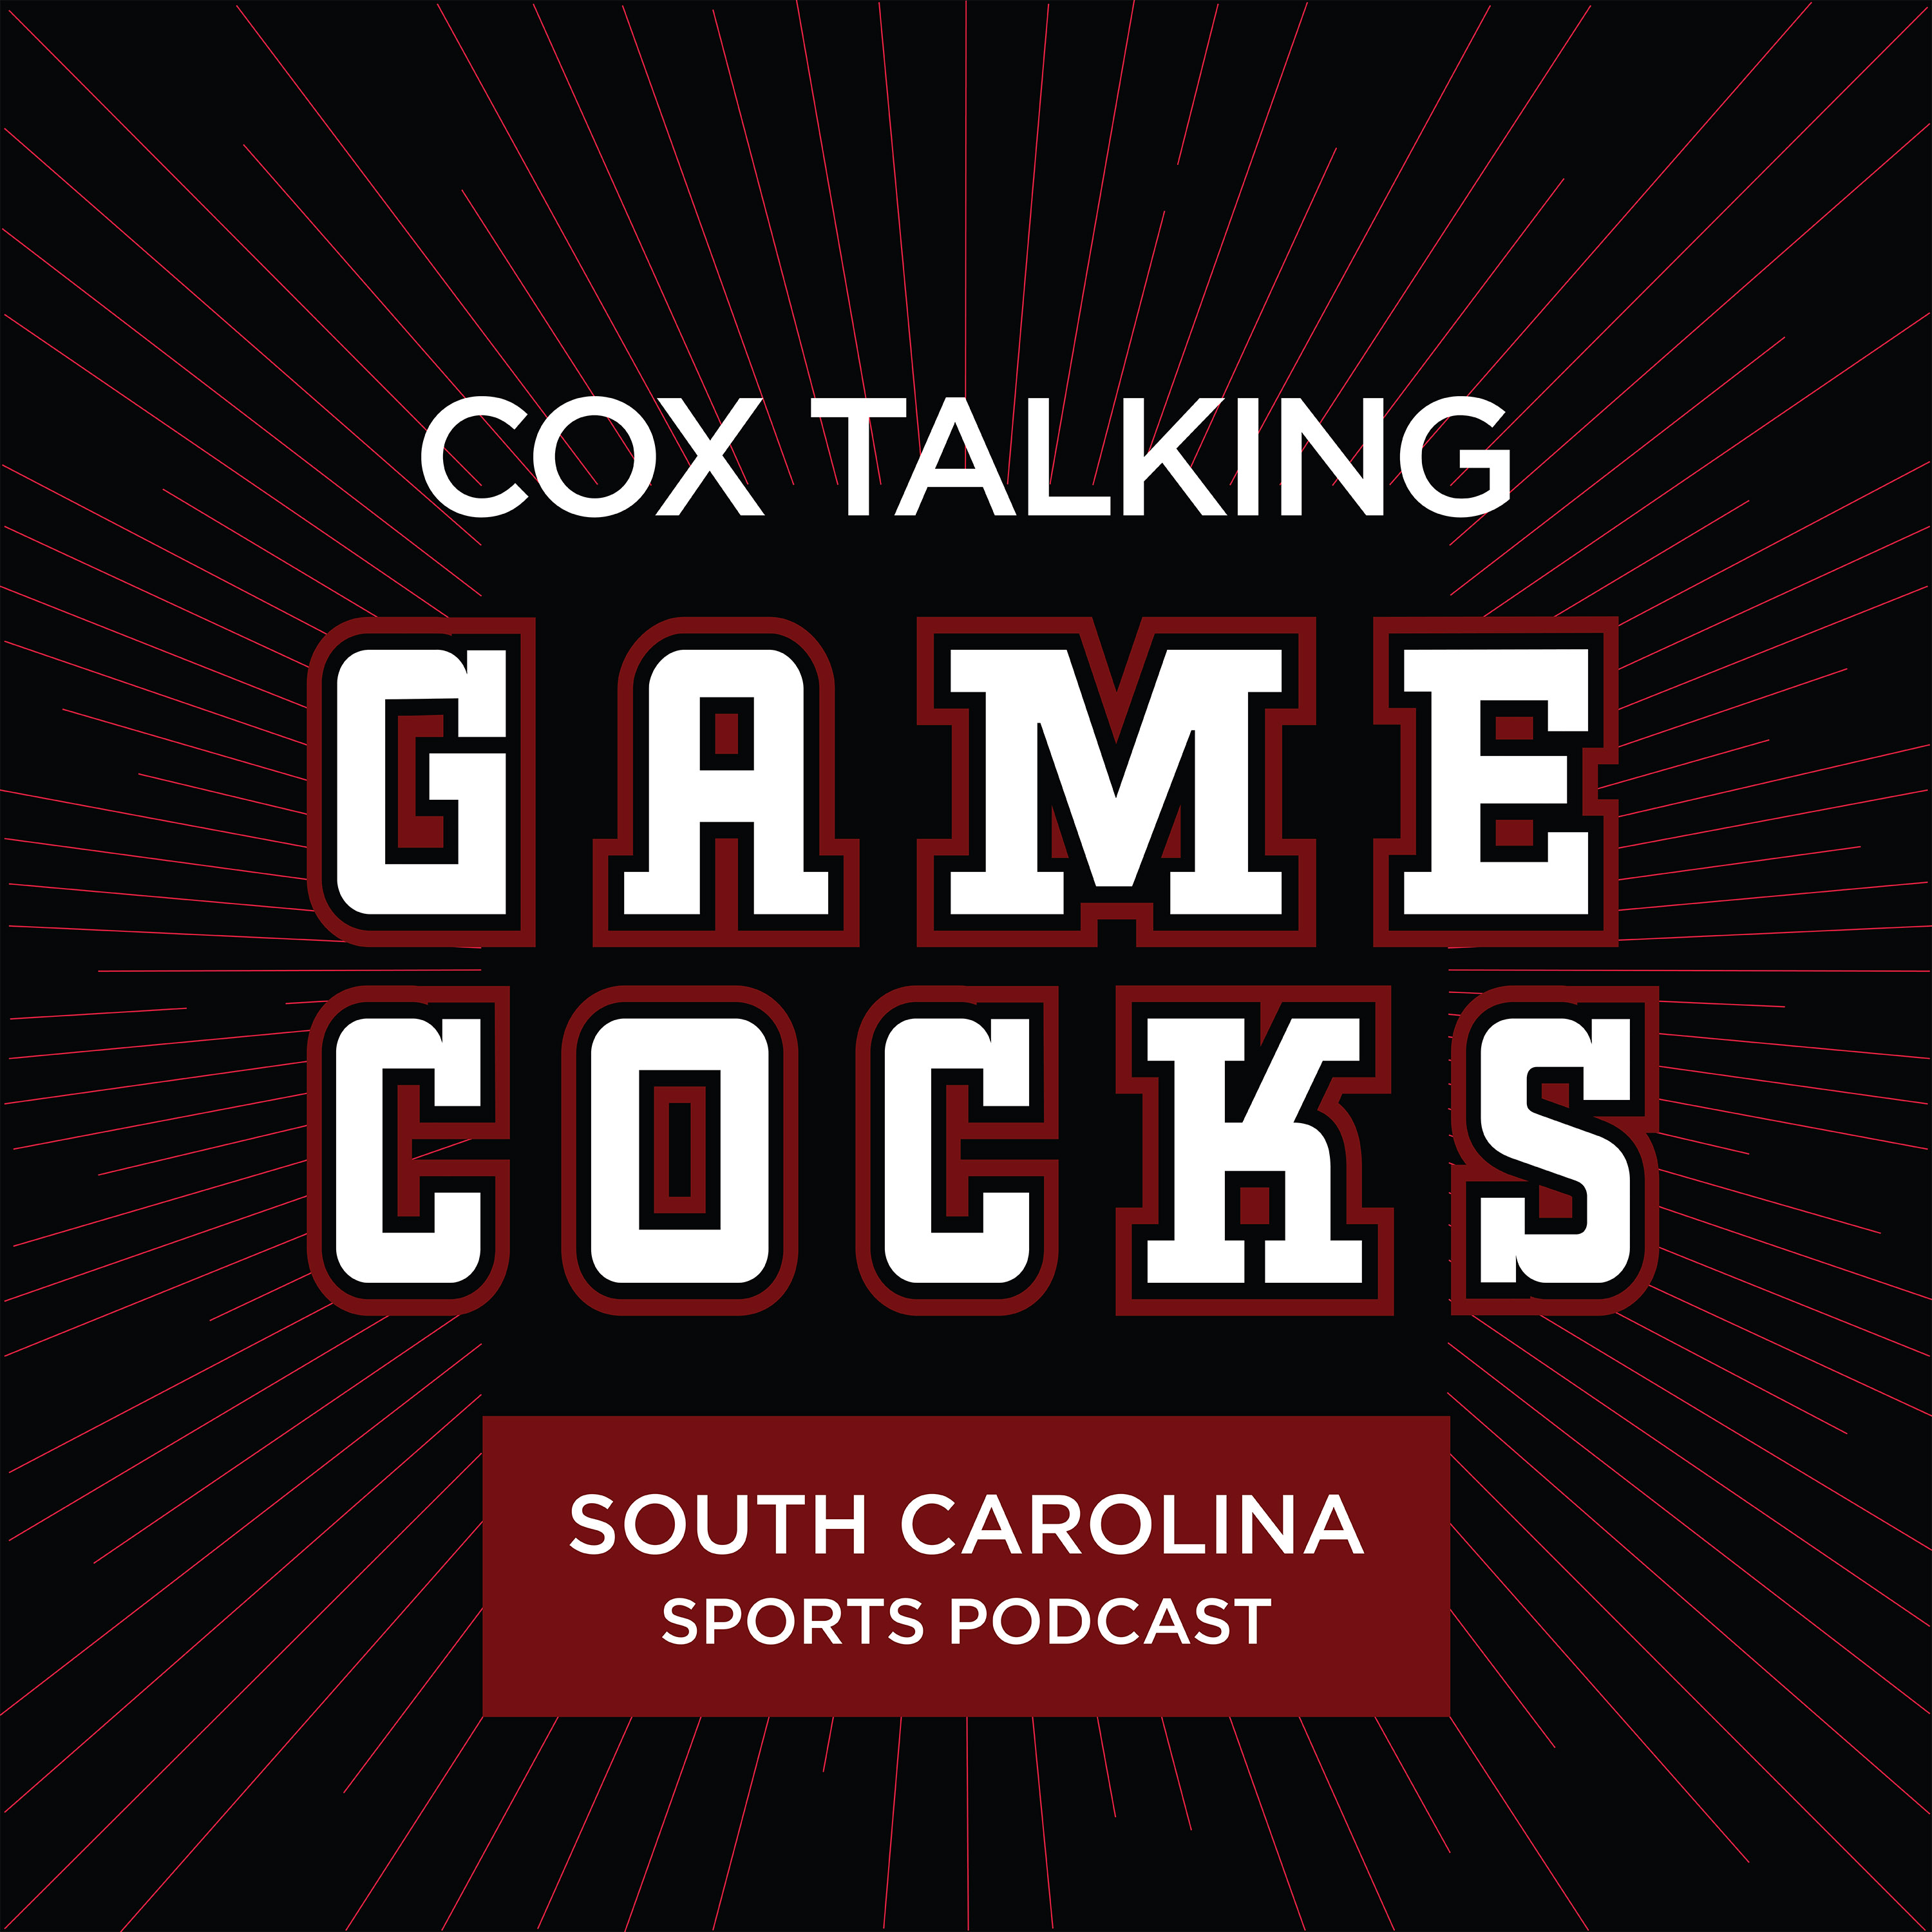 Gamecocks Aim For First SEC Win of Season: Pregame Analysis, Storylines & Crows To the Game